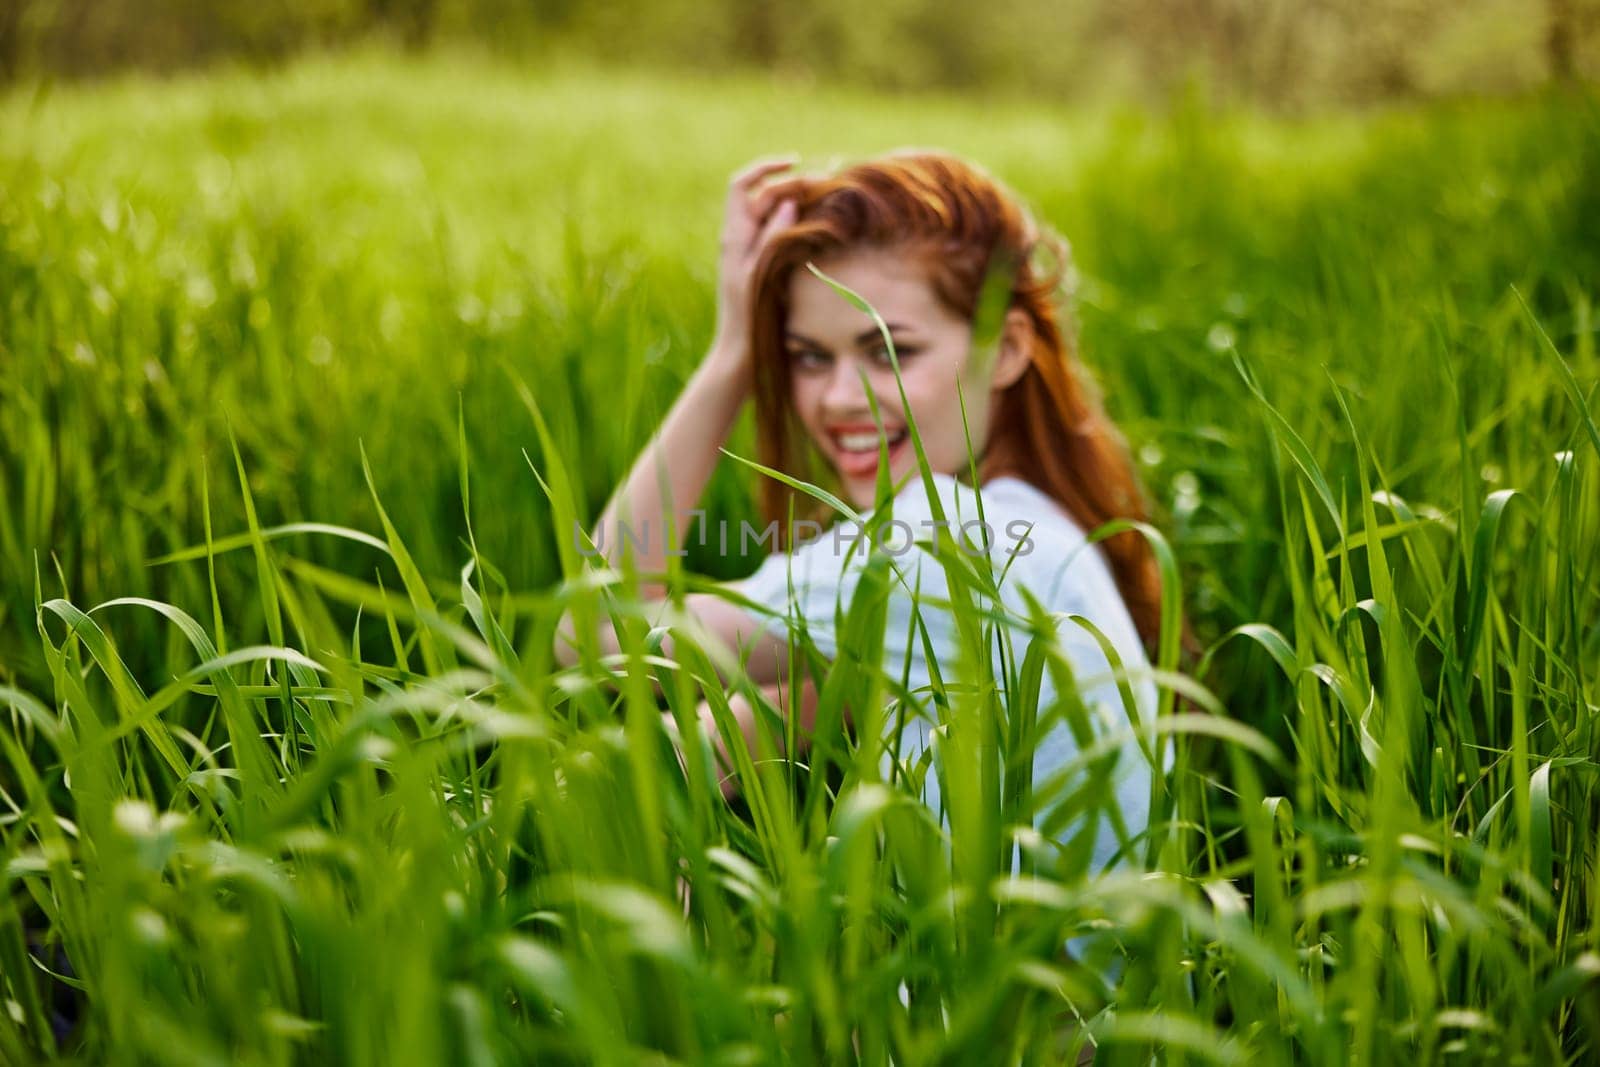 photograph of a woman sitting in the grass focusing on grass leaves. High quality photo